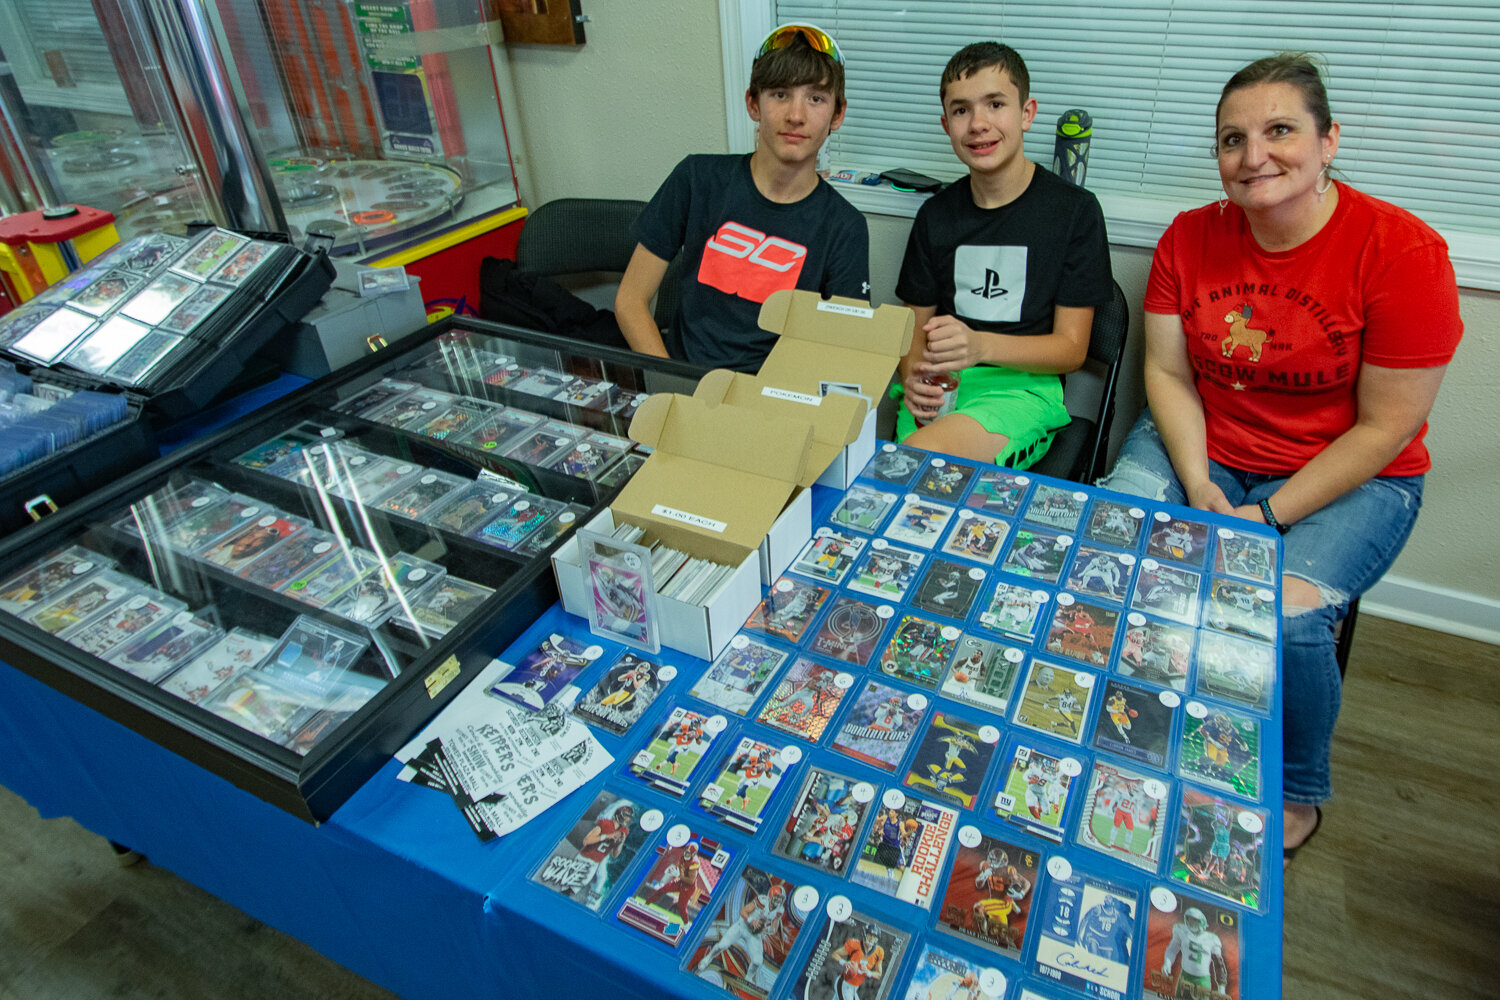 Visitors browse vendors' selections of sports and trading cards, sports memorabilia and other collectibles at the first Keiper's Card and Memorabilia Show on Saturday, Sept. 2 inside the Tower Plaza Mall at 320 N. Tower Ave. in Centralia.